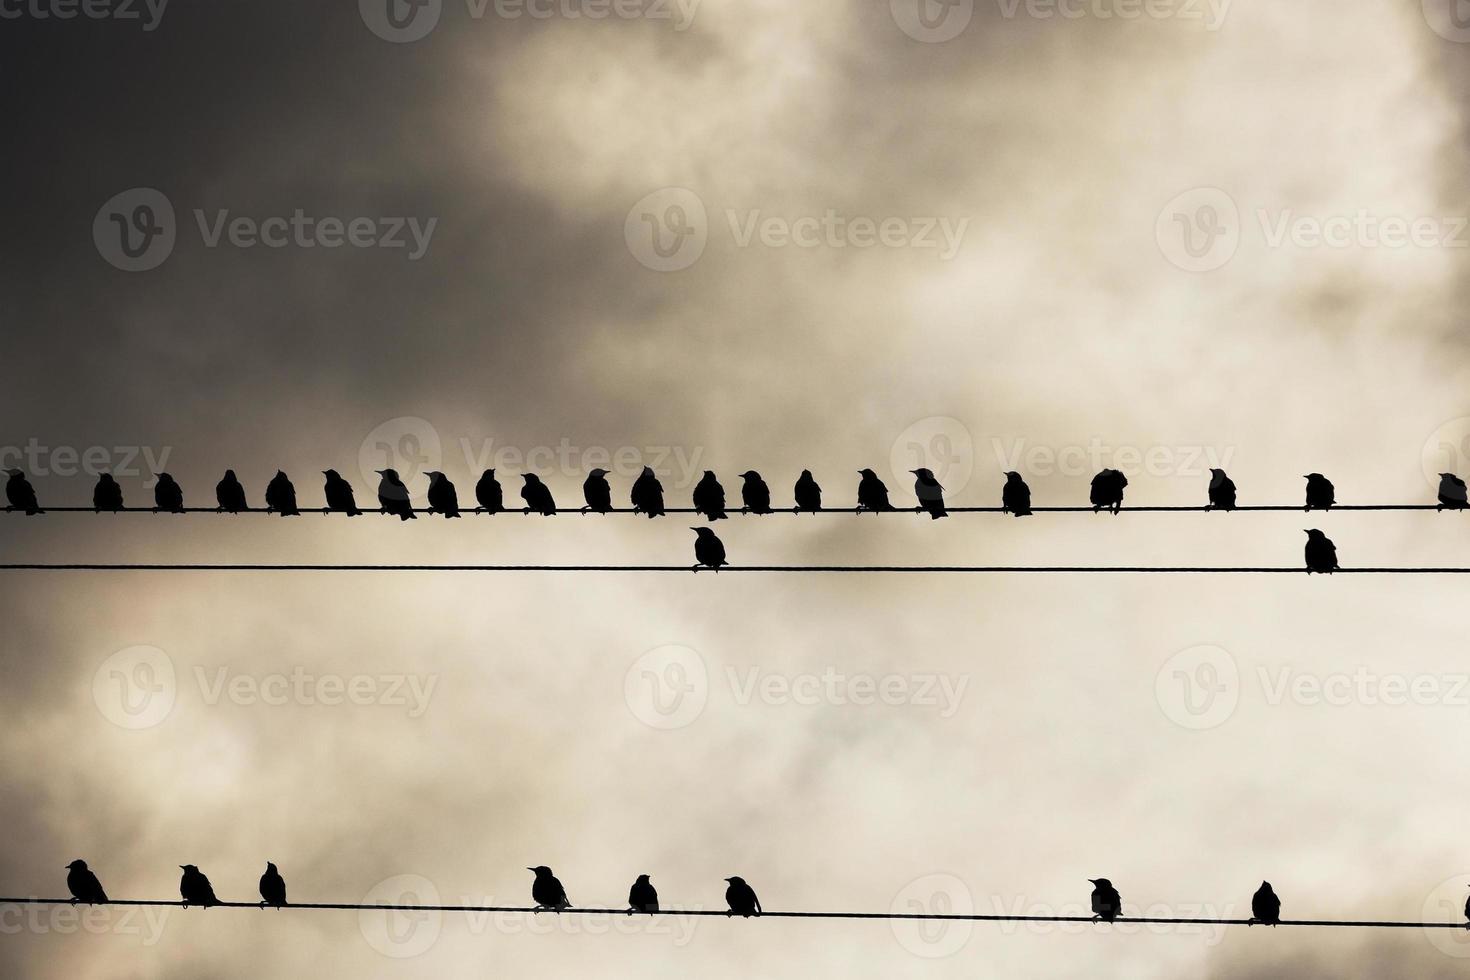 Birds on a wire photo